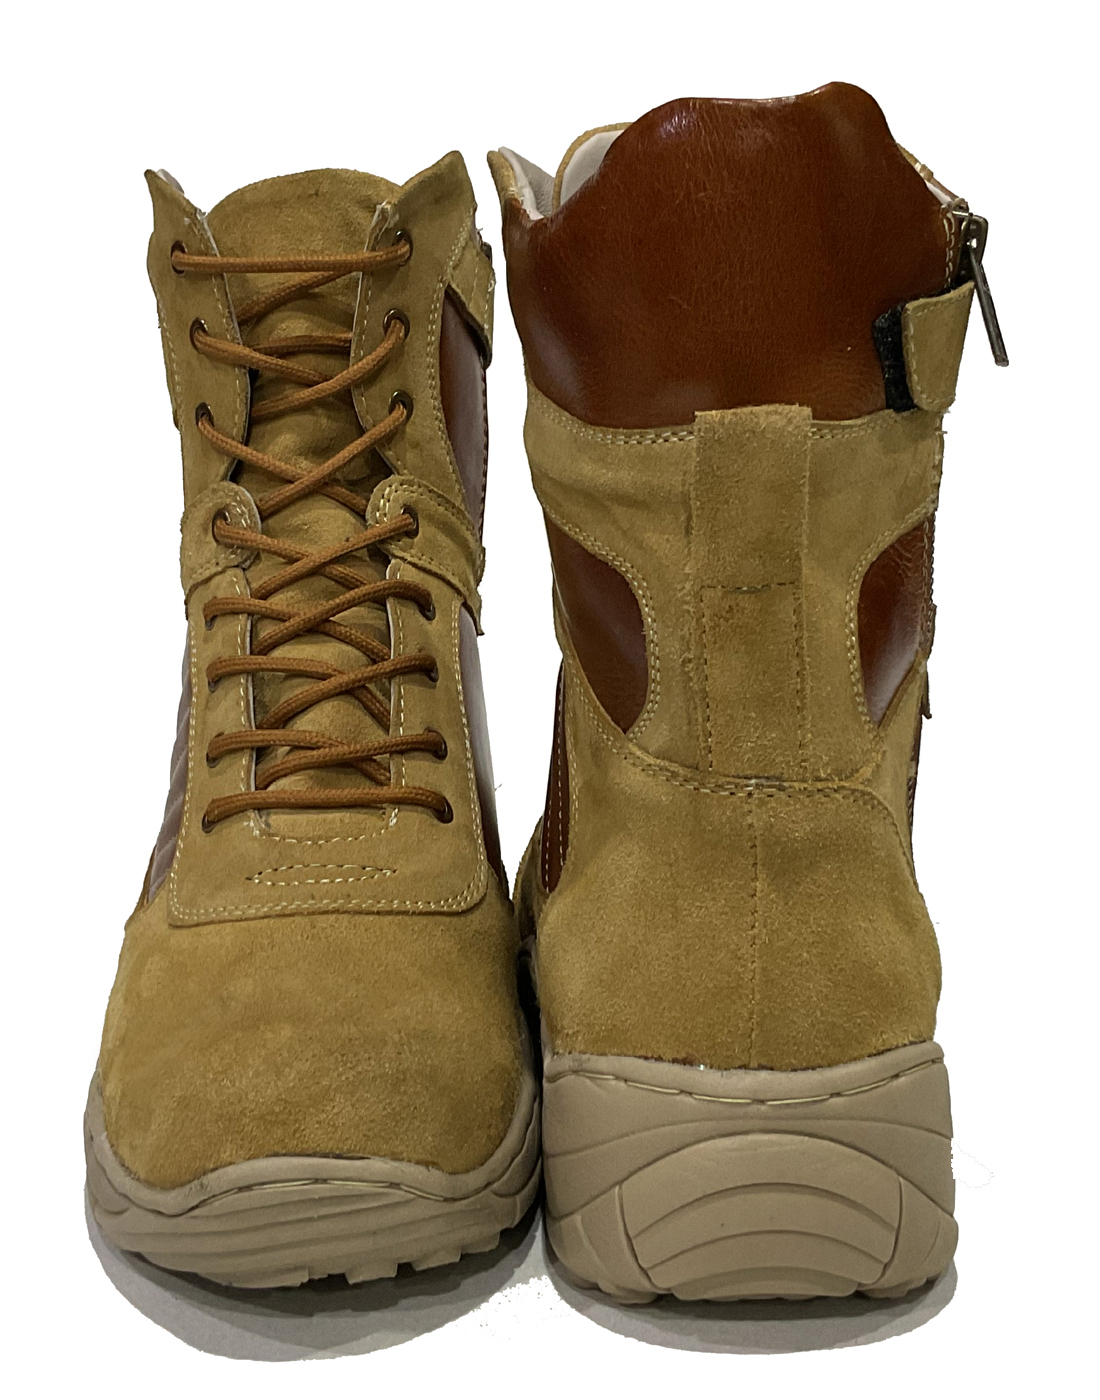 Air Force Uniform boots with side zip